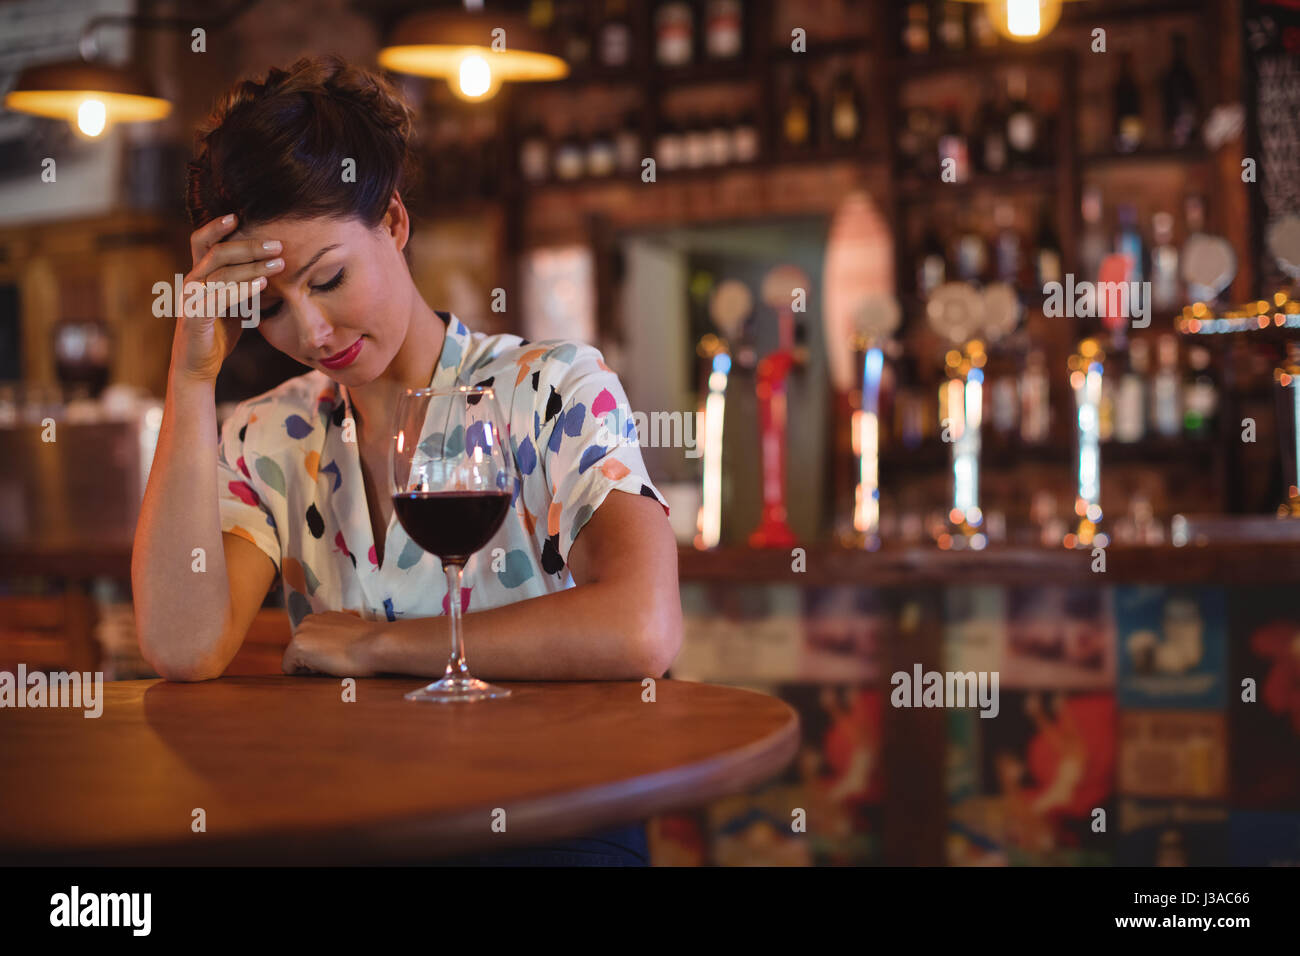 Upset woman sitting with hands on forehead in pub Stock Photo